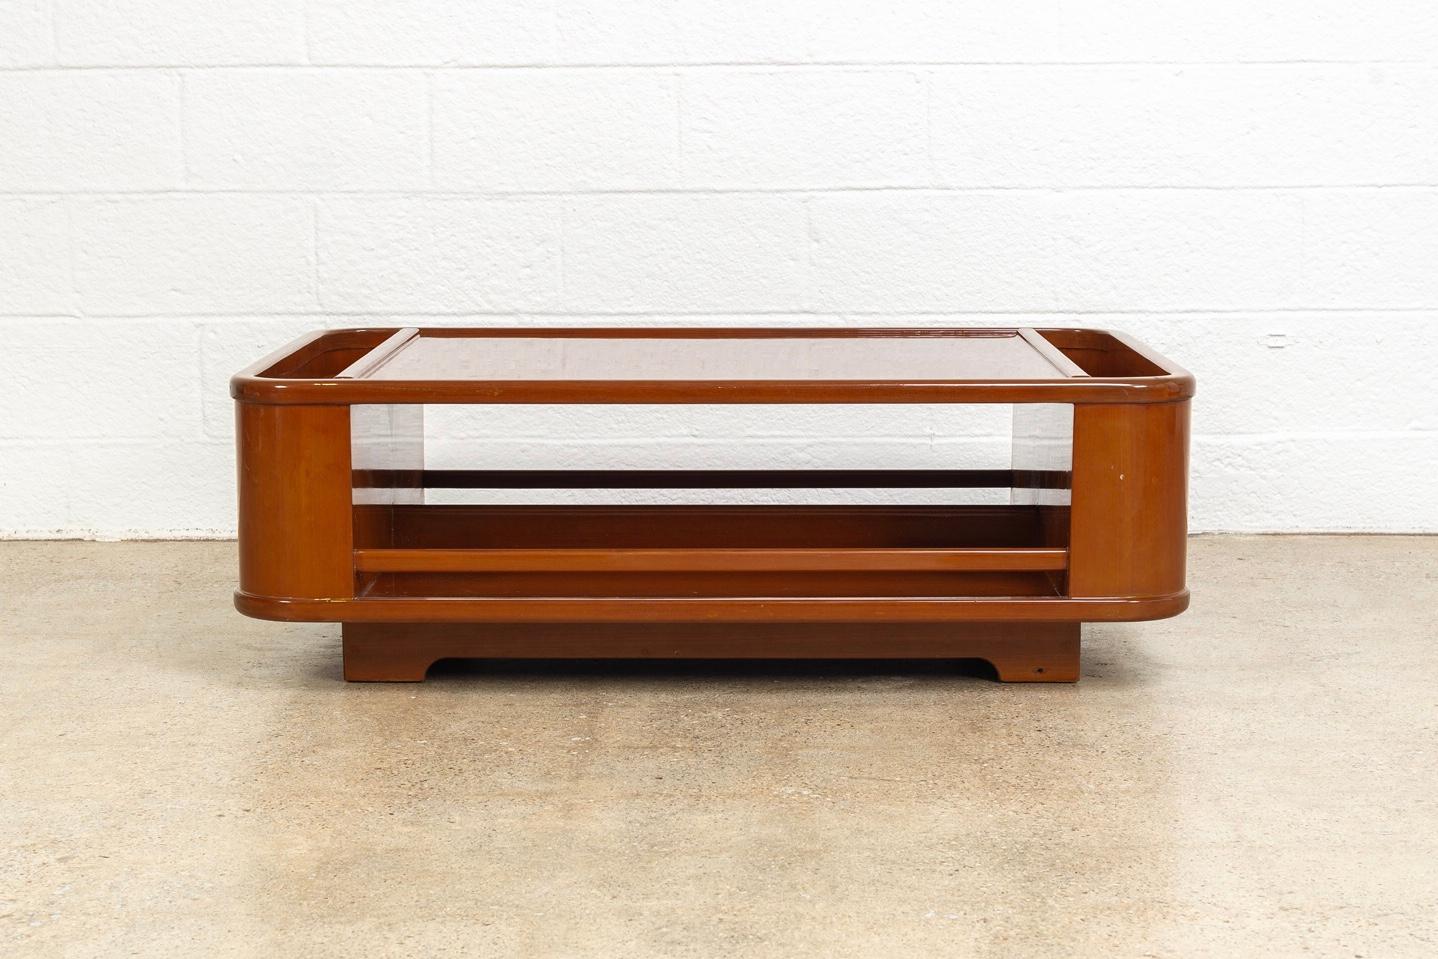 Late 20th Century Mid-Century Modern Italian Lacquered Wood Rectangular Coffee Table, 1970s For Sale